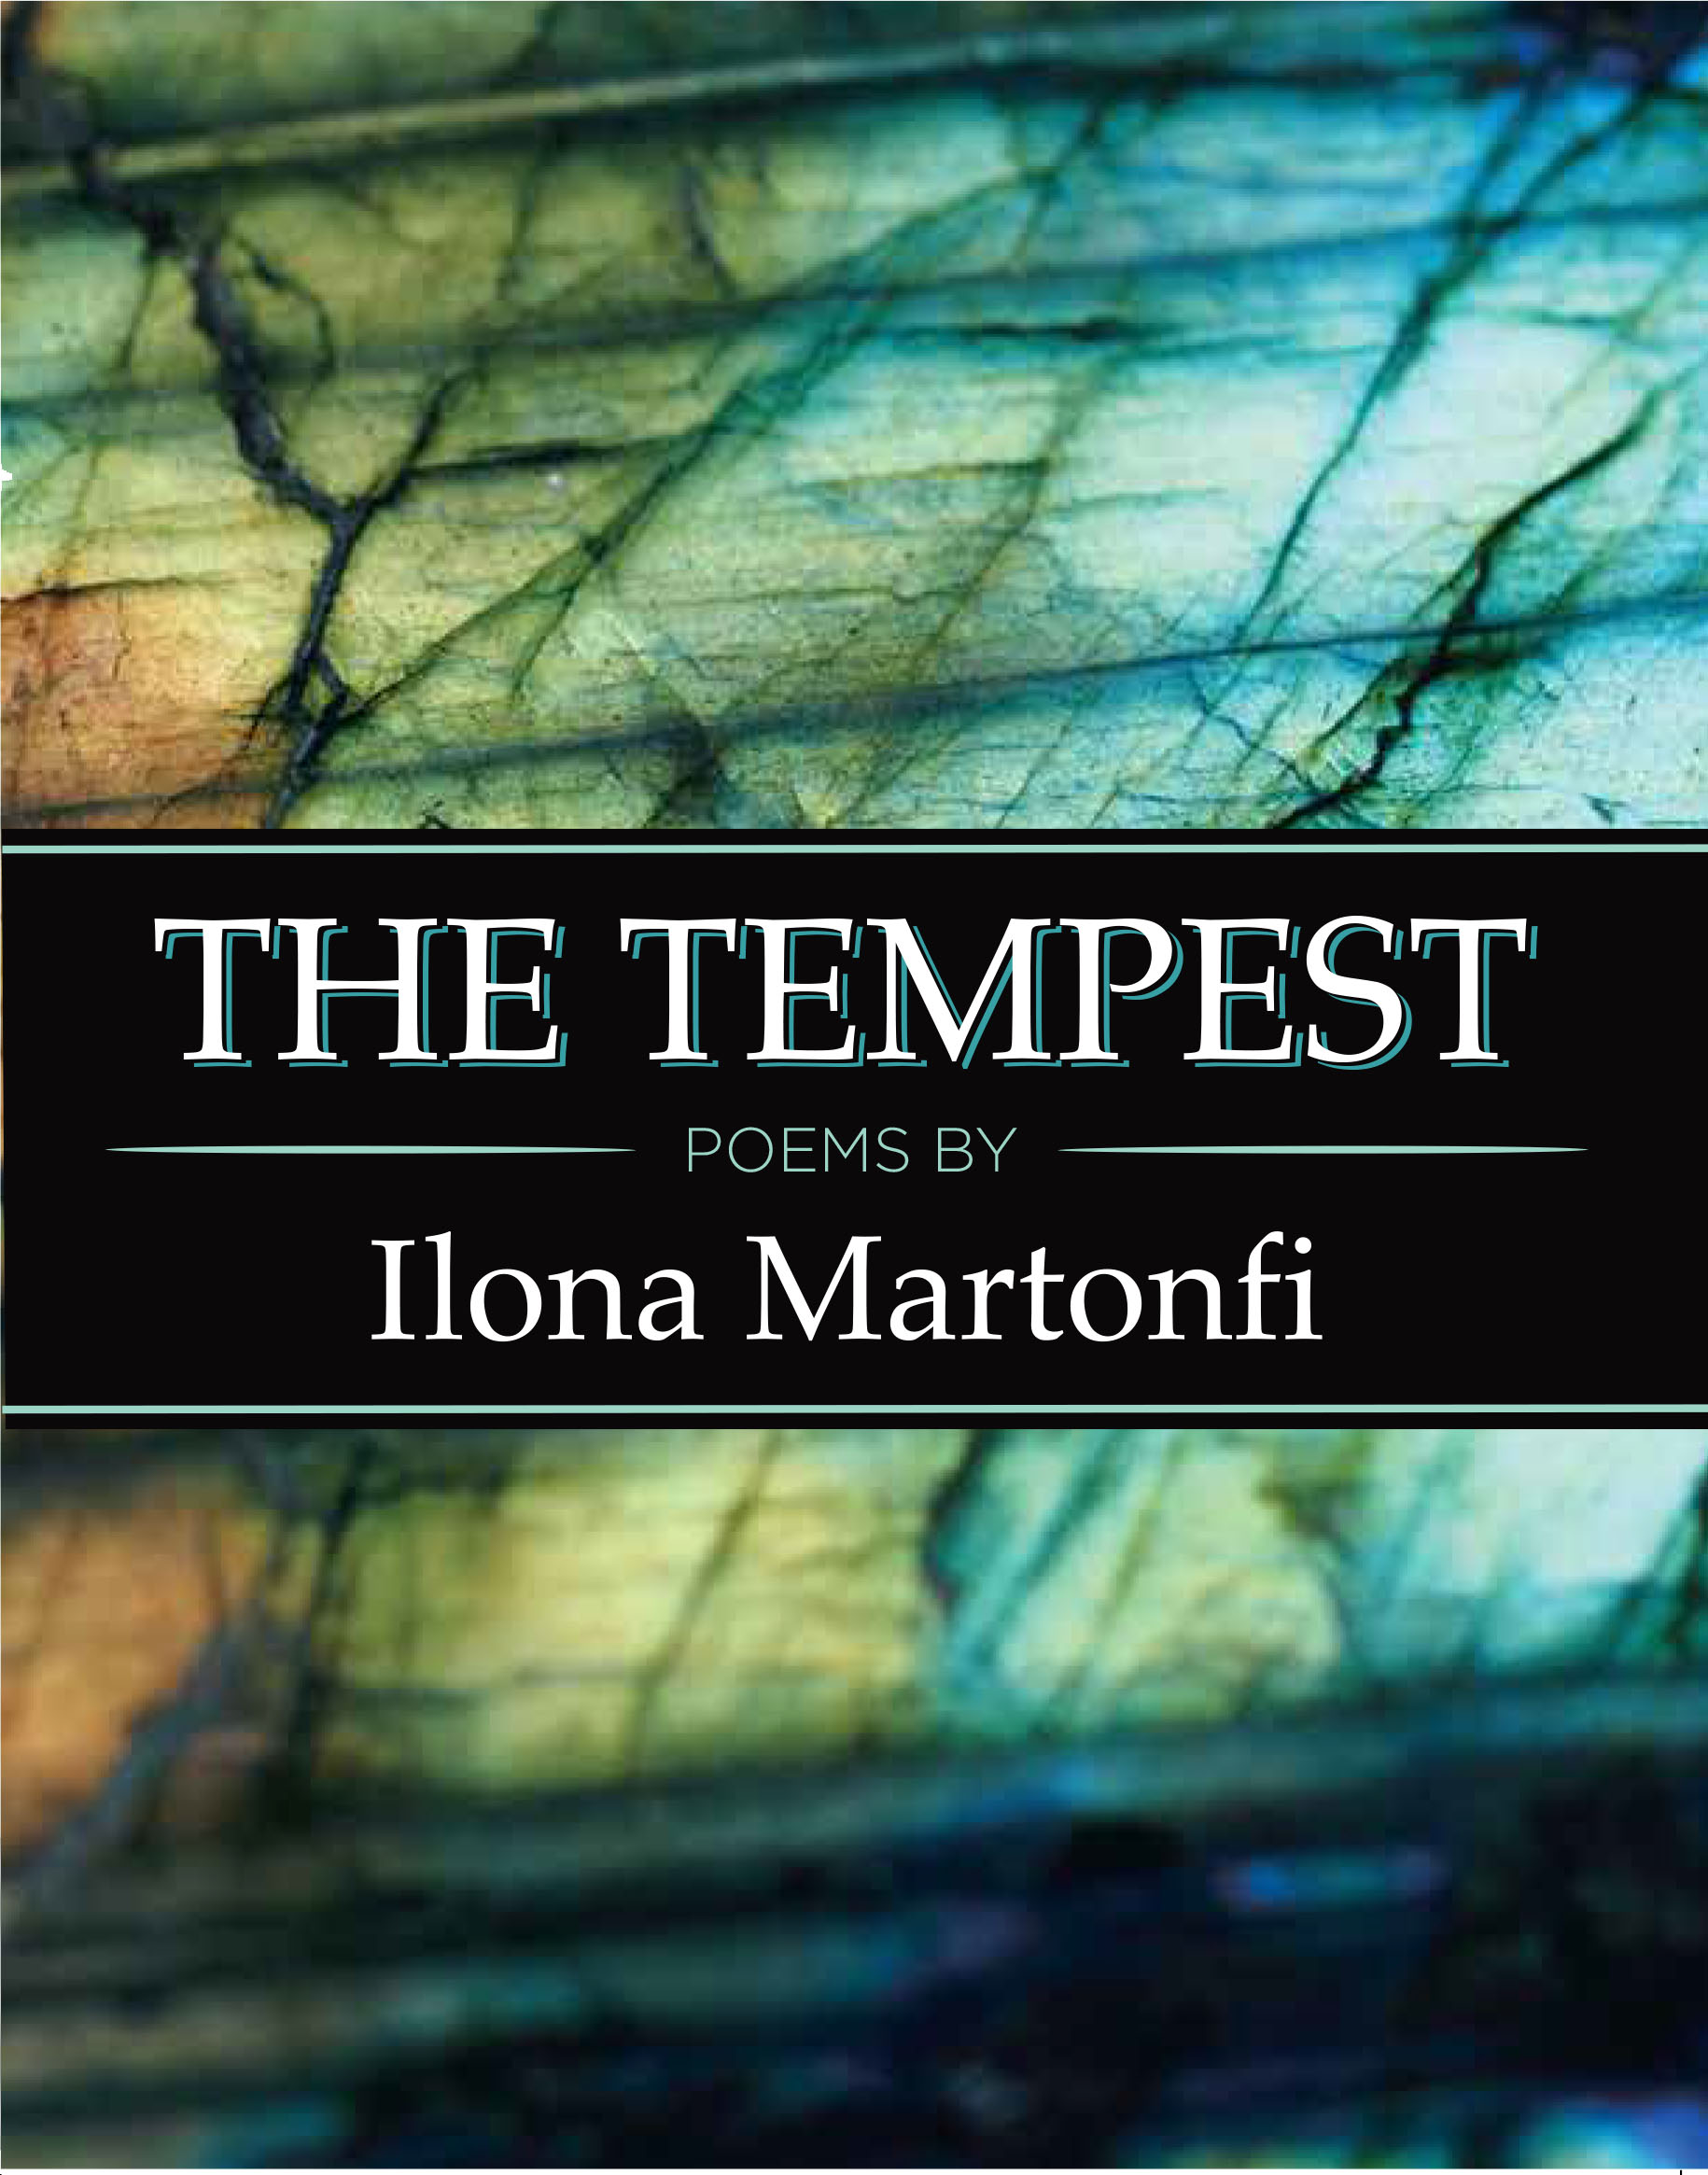 green, blue and gold labodorite with typography "The Tempest". "Poems by Ilona Martonfi"